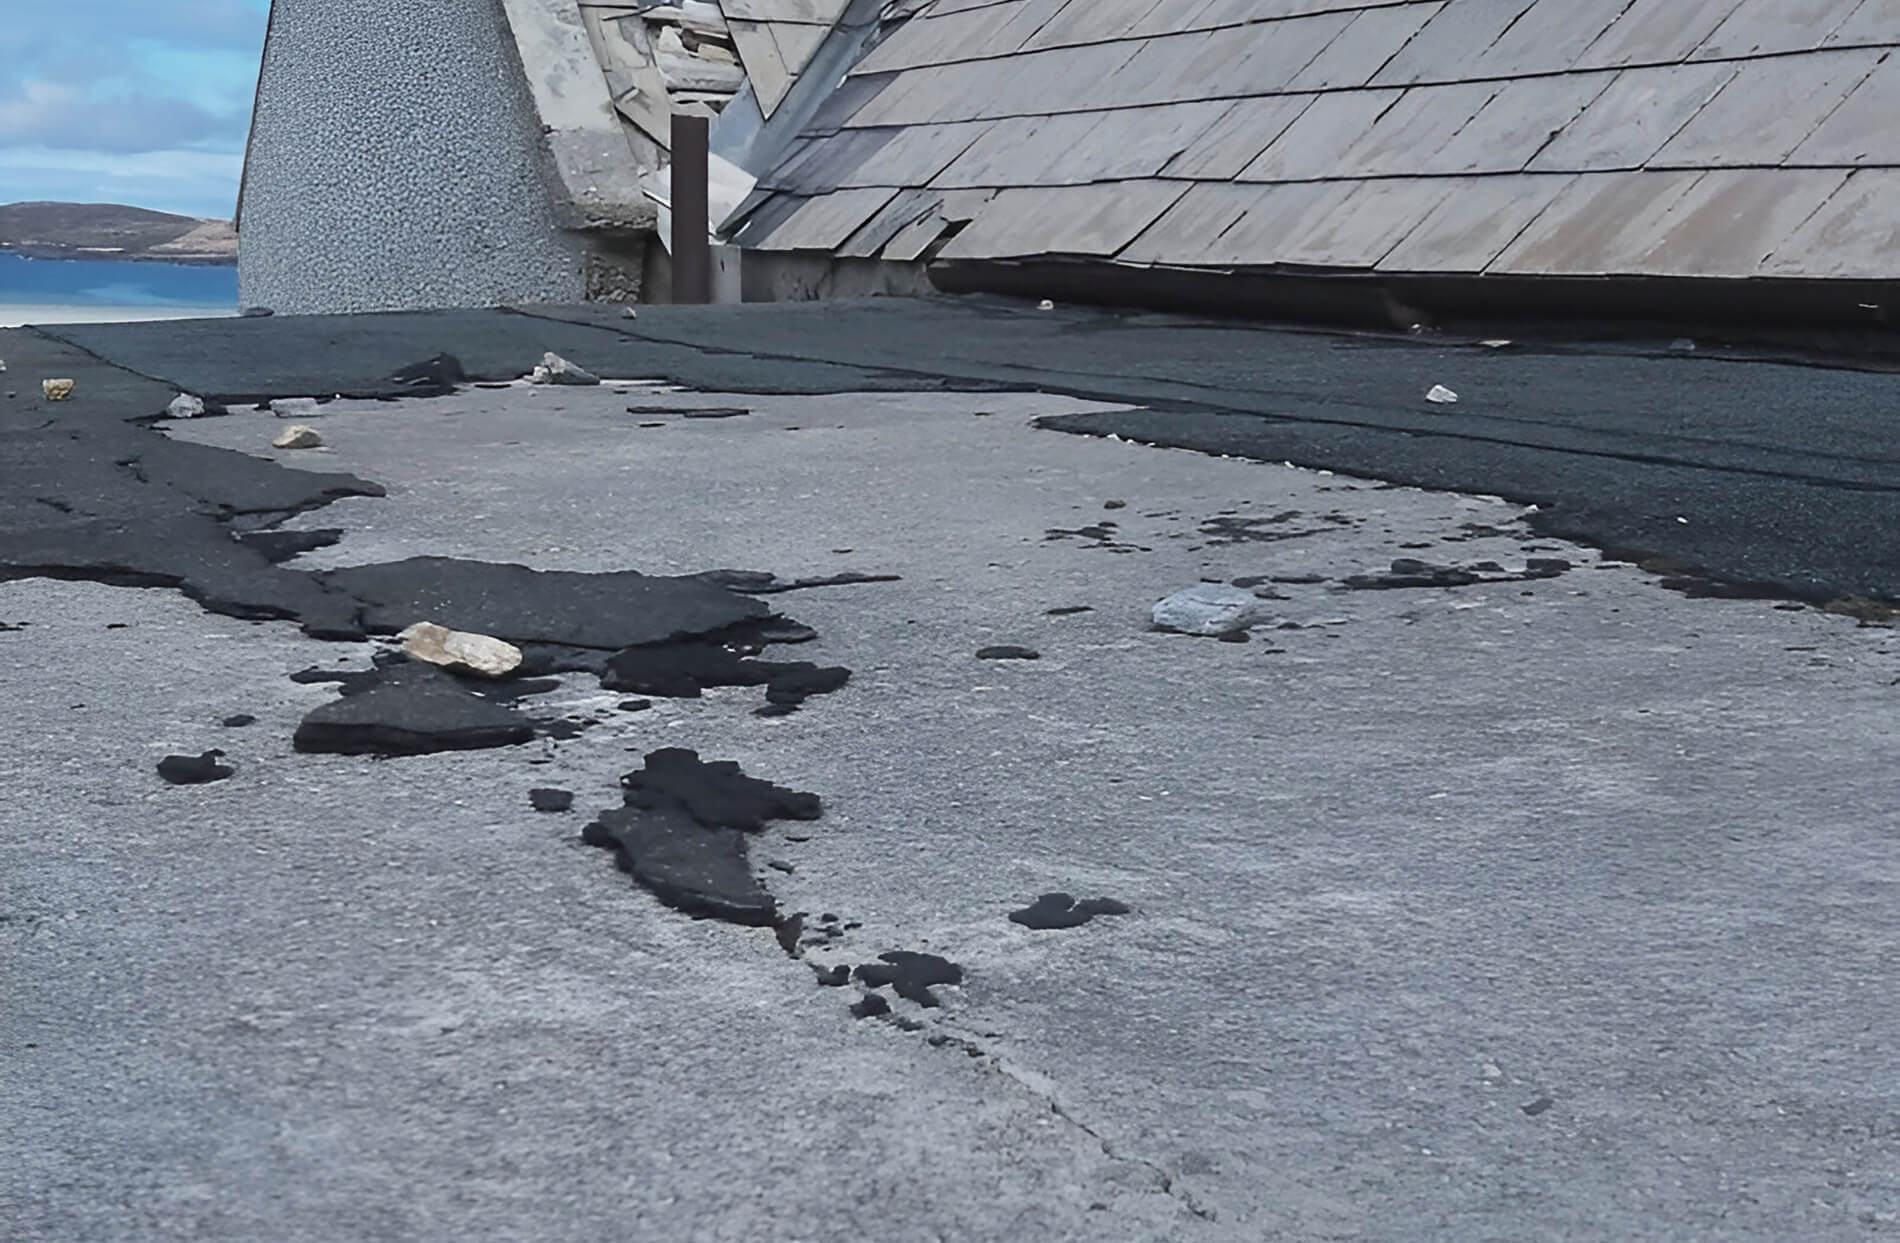 Inspecting your roof for damage and repair